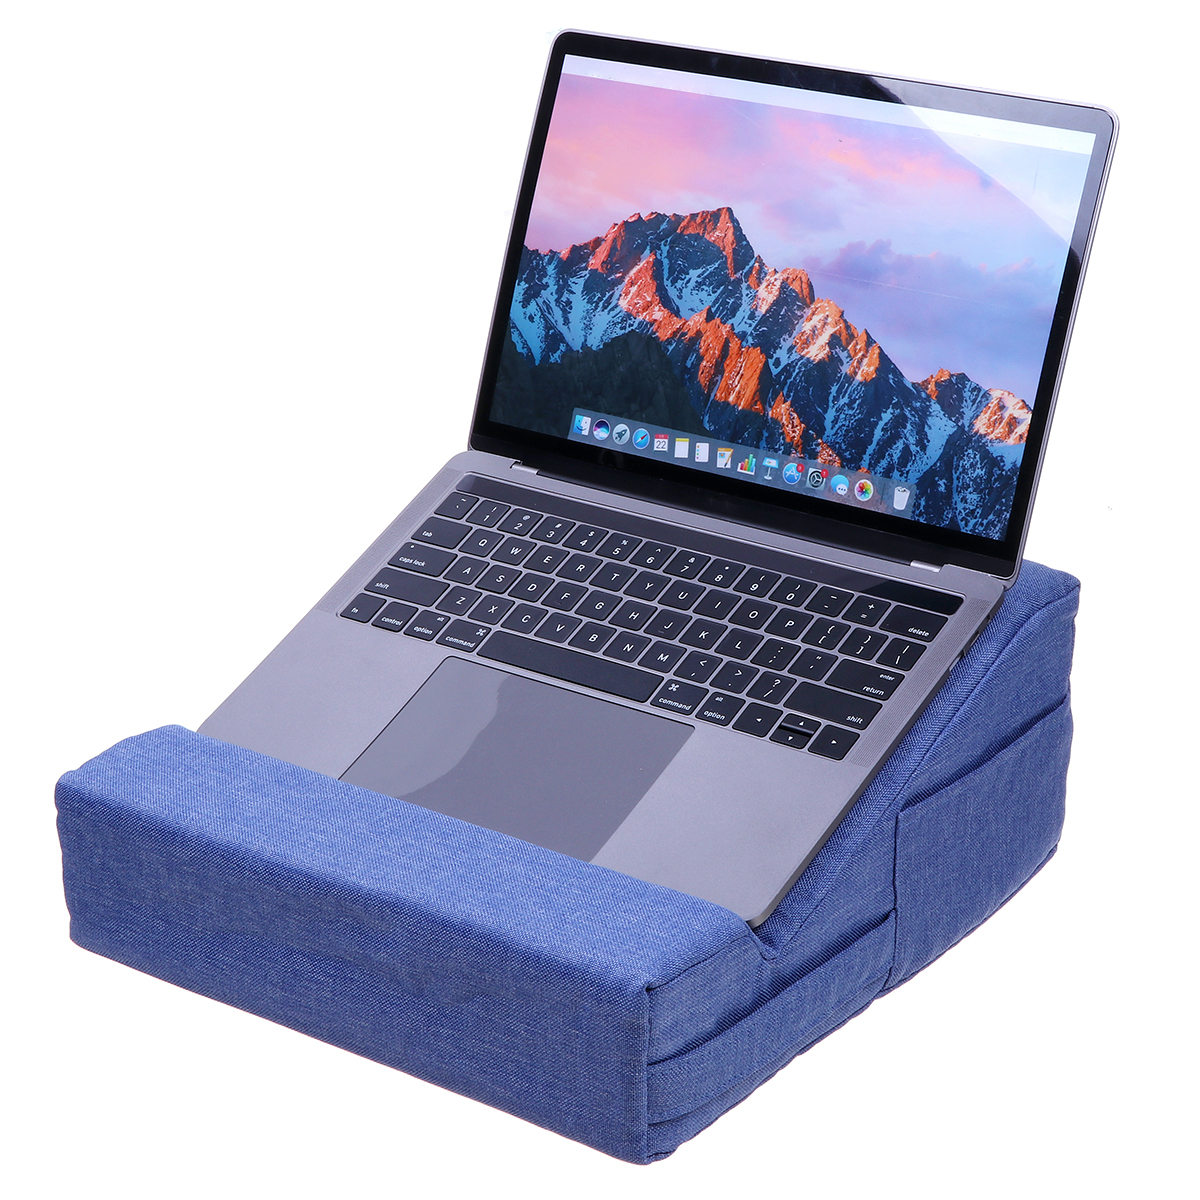 Find Laptop Stand Multicolor Portable Tablet Cushion Lap Rest Cushion for Laptop Magazines Books for Sale on Gipsybee.com with cryptocurrencies